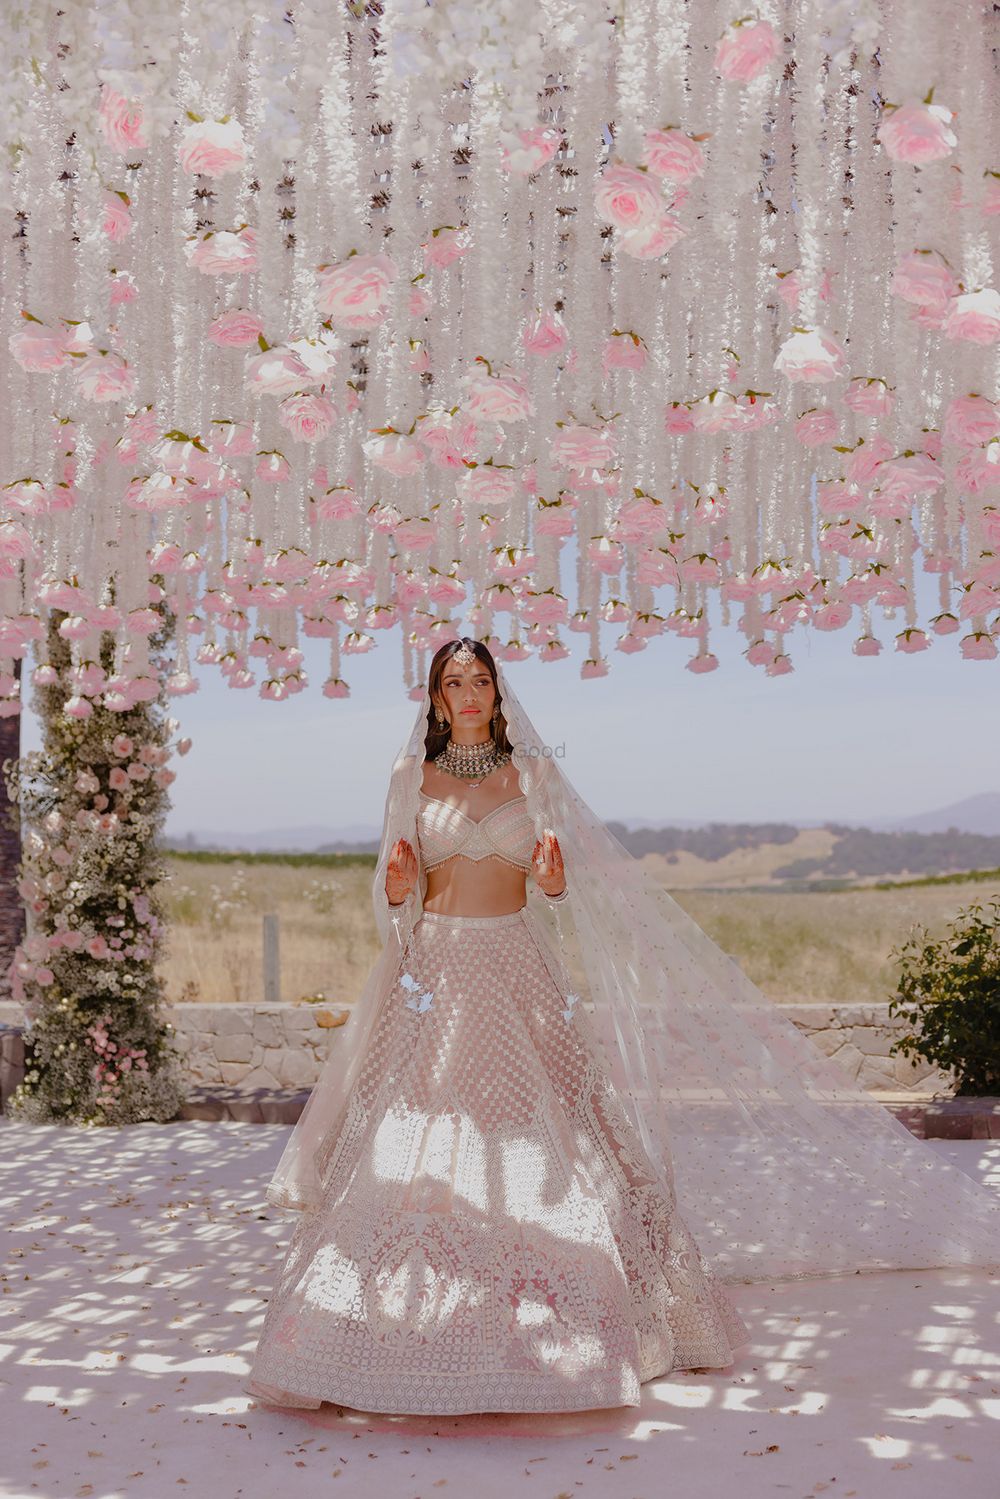 Photo of Stunning bridal portrait with bride in a pastel lehenga and hanging floral decor elements in white and baby pink